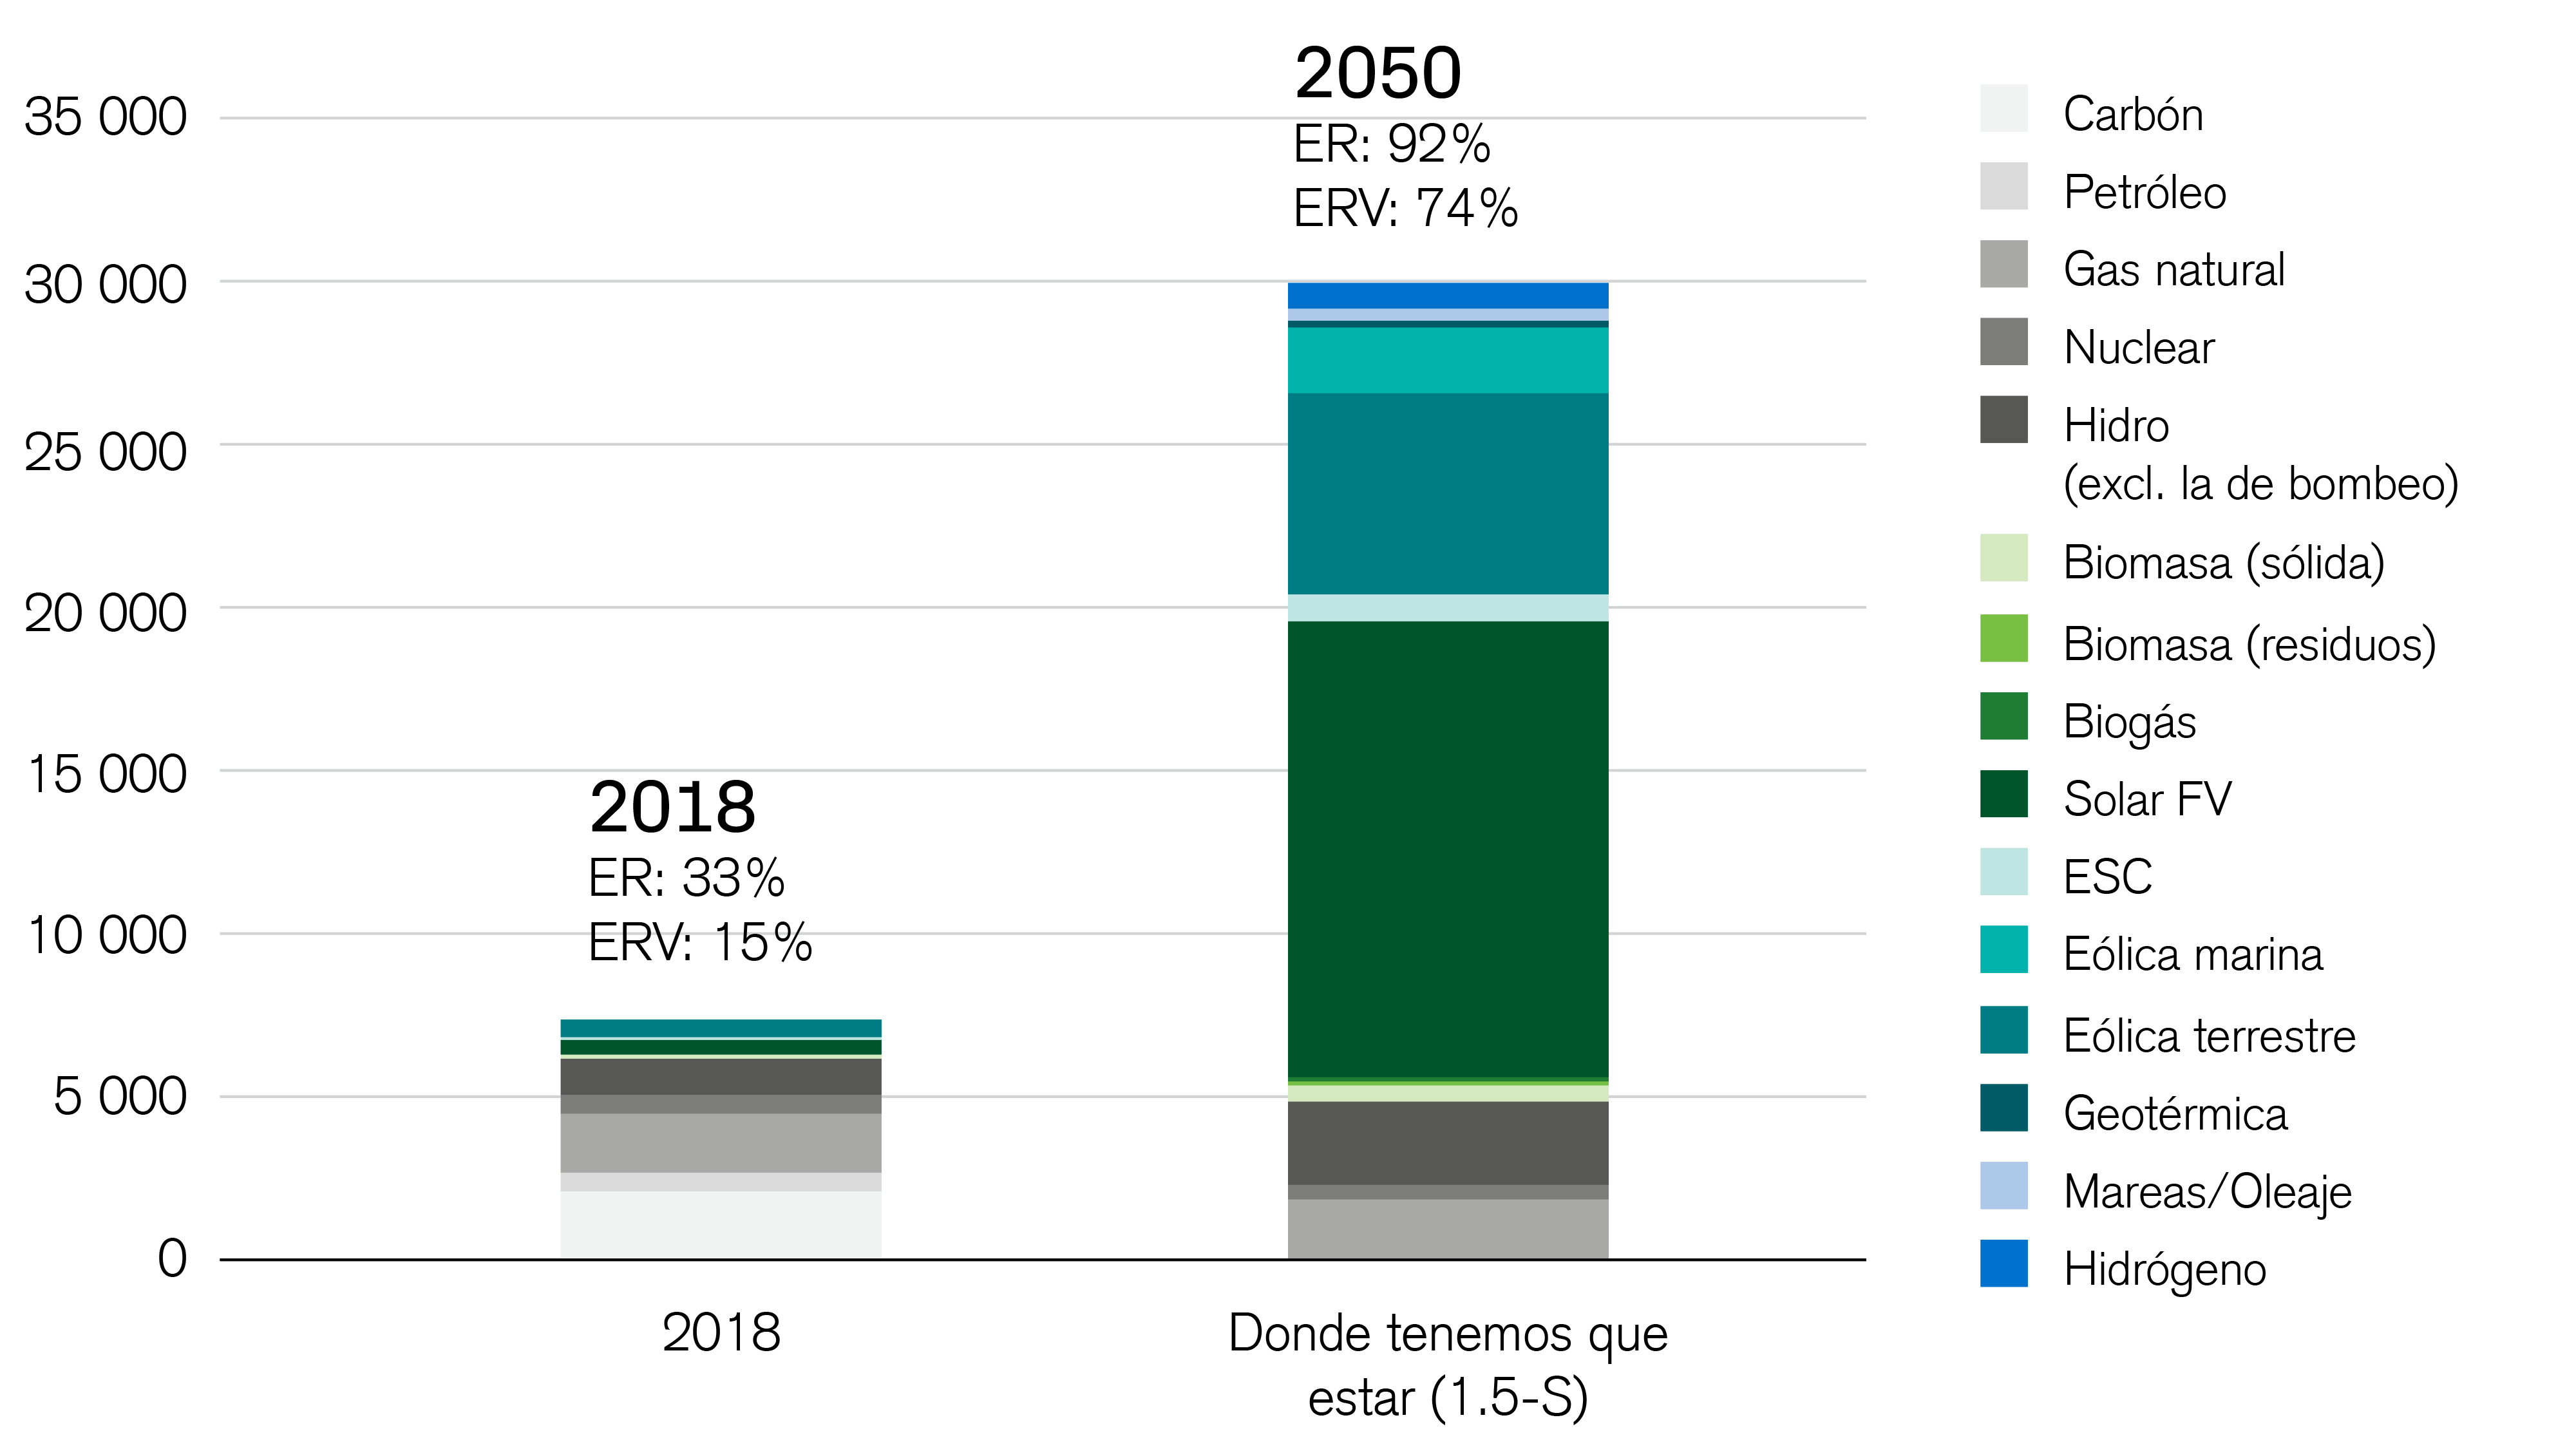 The production capacity of renewable sources of energy (RE) needs to increase nearly tenfold by 2050, relative to 2018.